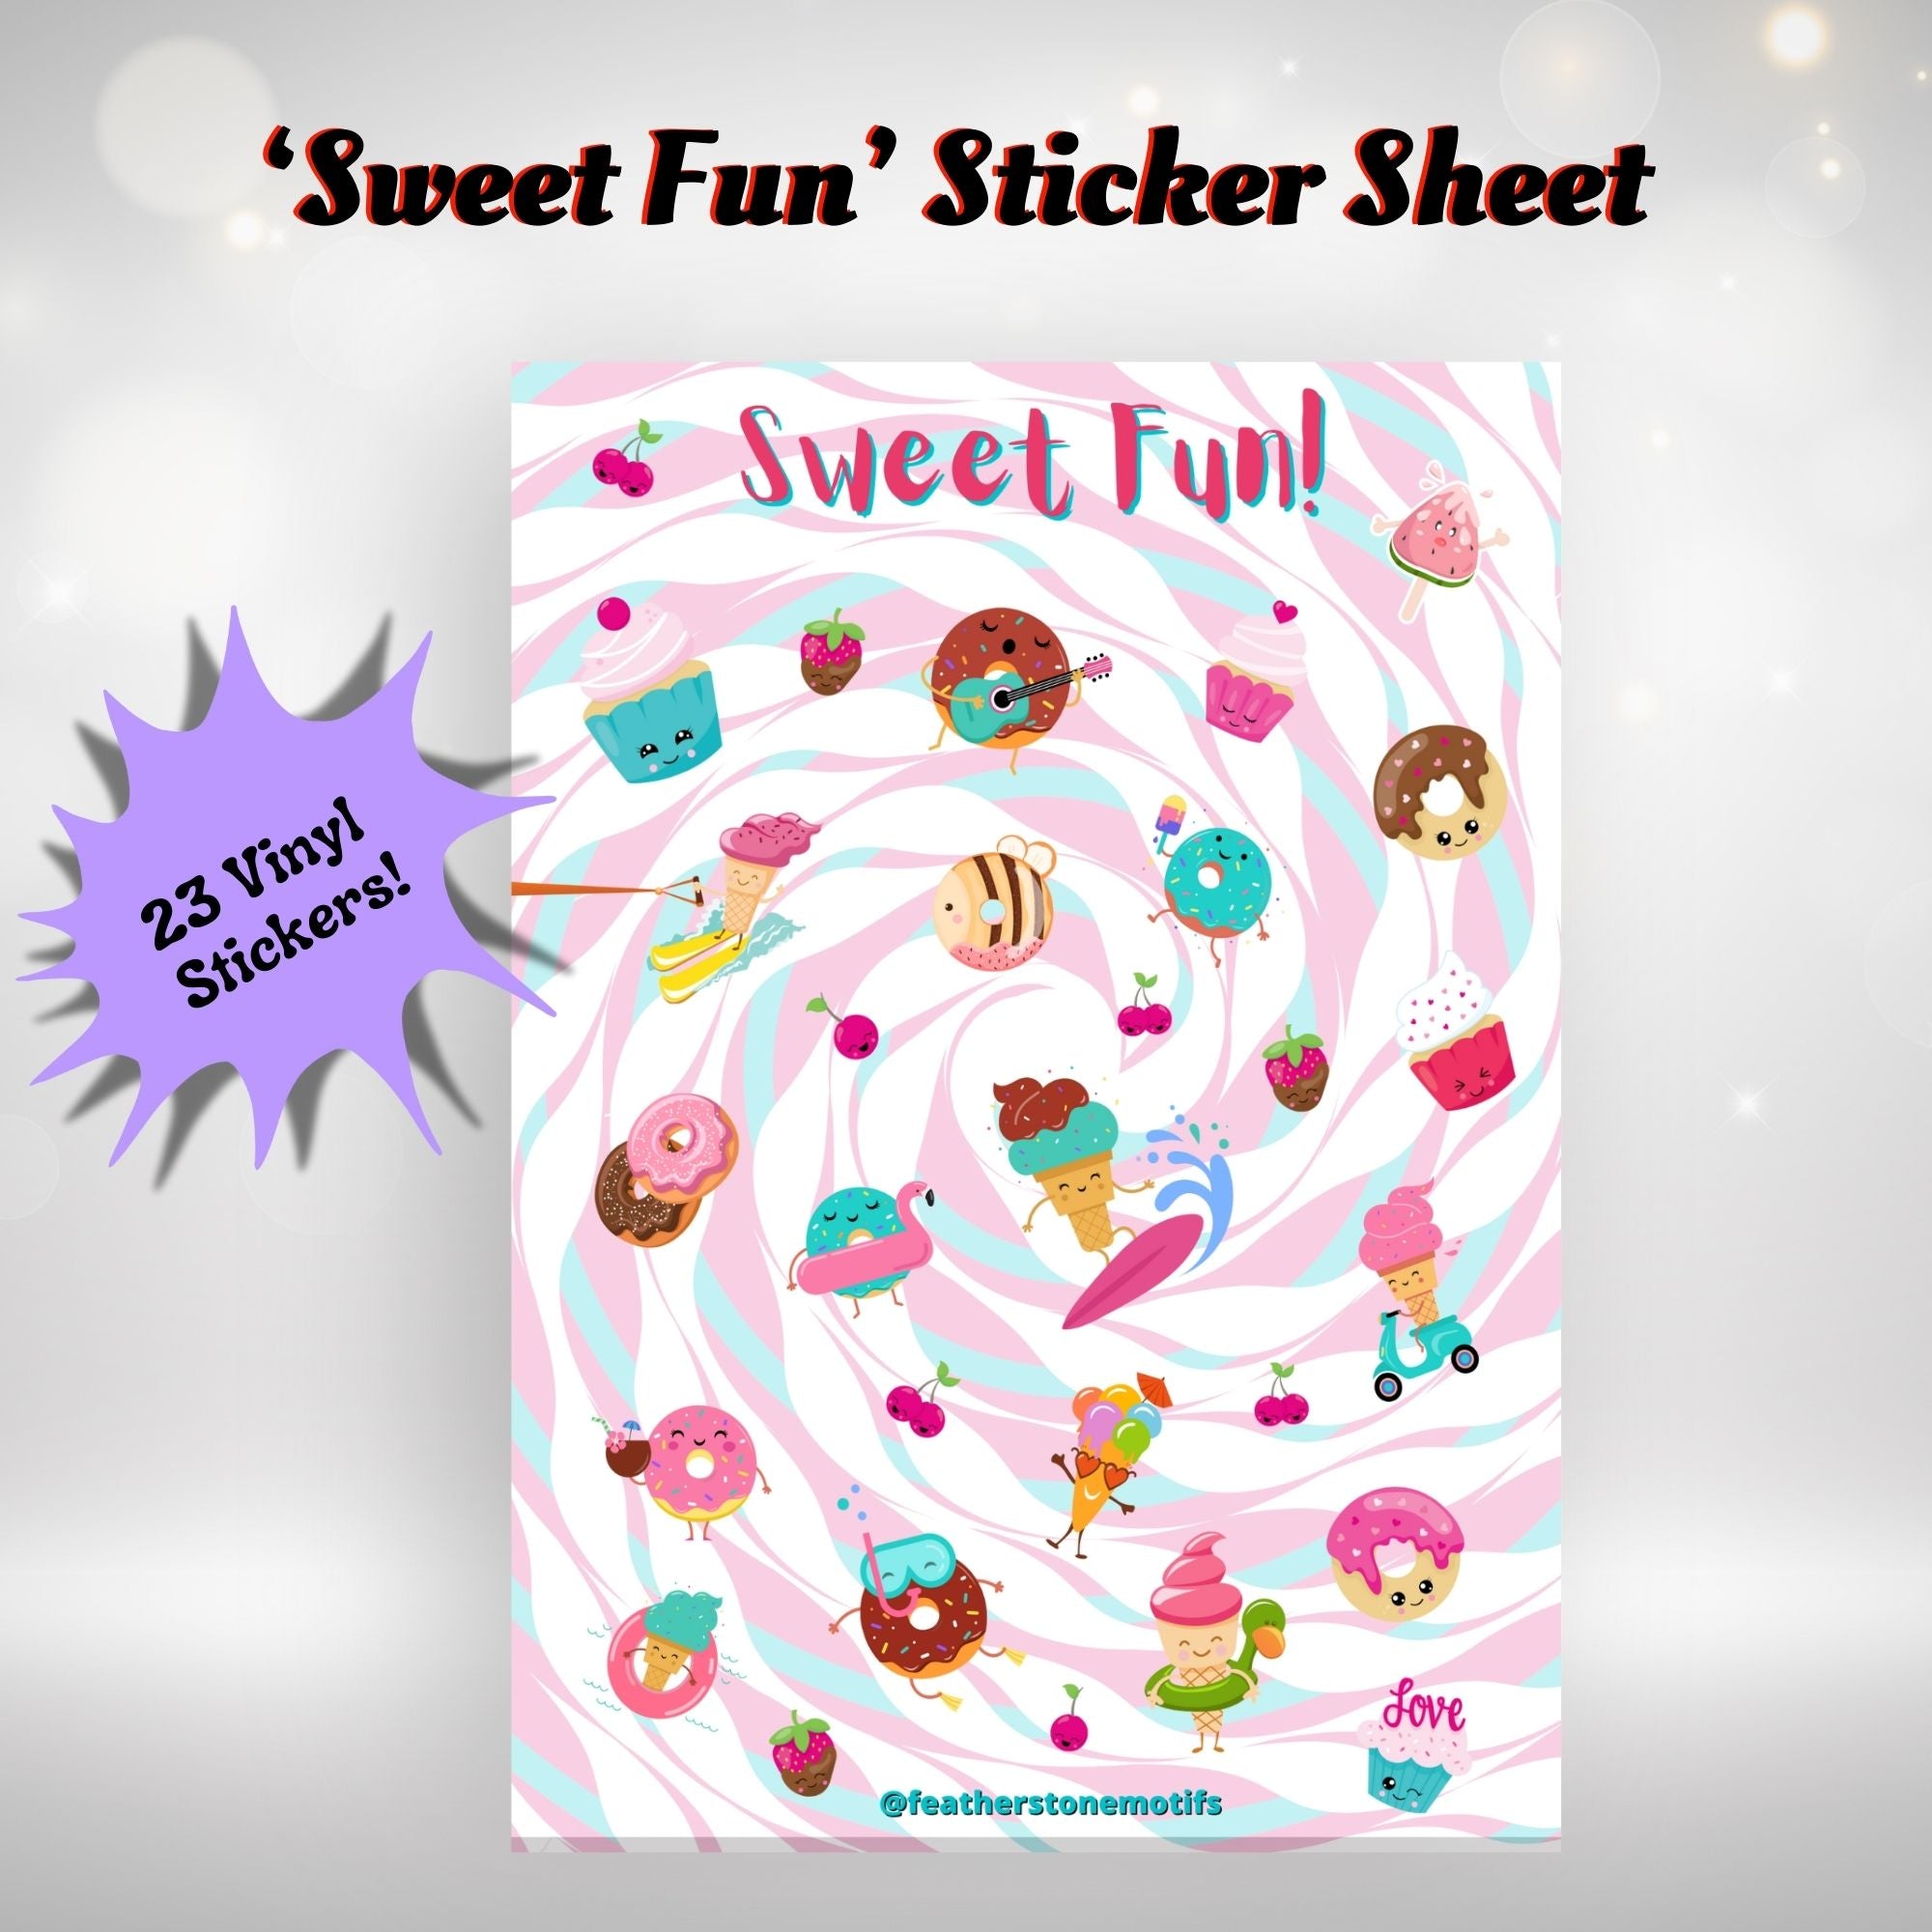 This image shows the Sweet Fun! sticker sheet with 23 vinyl stickers that is included in the Sweet Fun! themed Camp Postcard Kit.